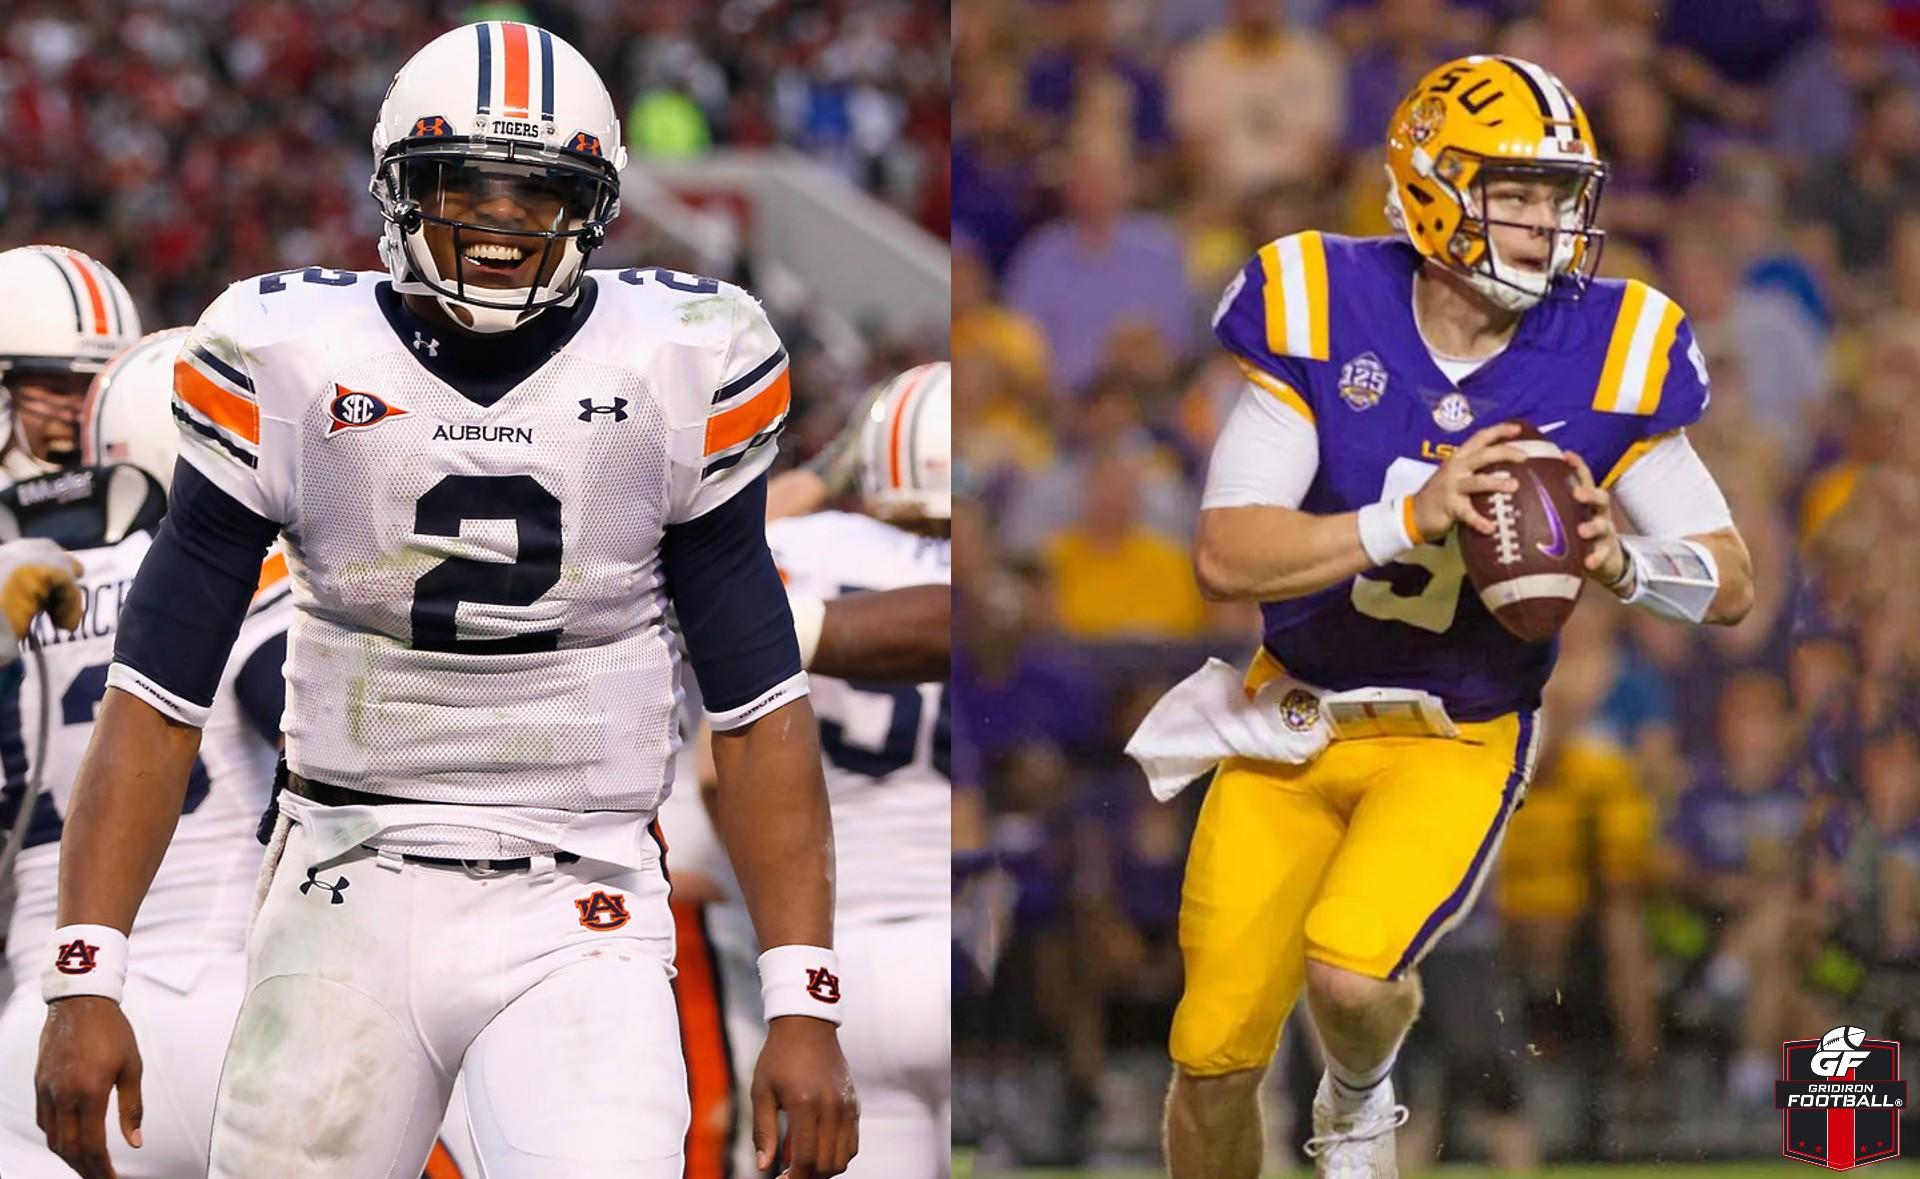 Ben vs. Grant: What is the greatest single season performance by a QB in college football history?